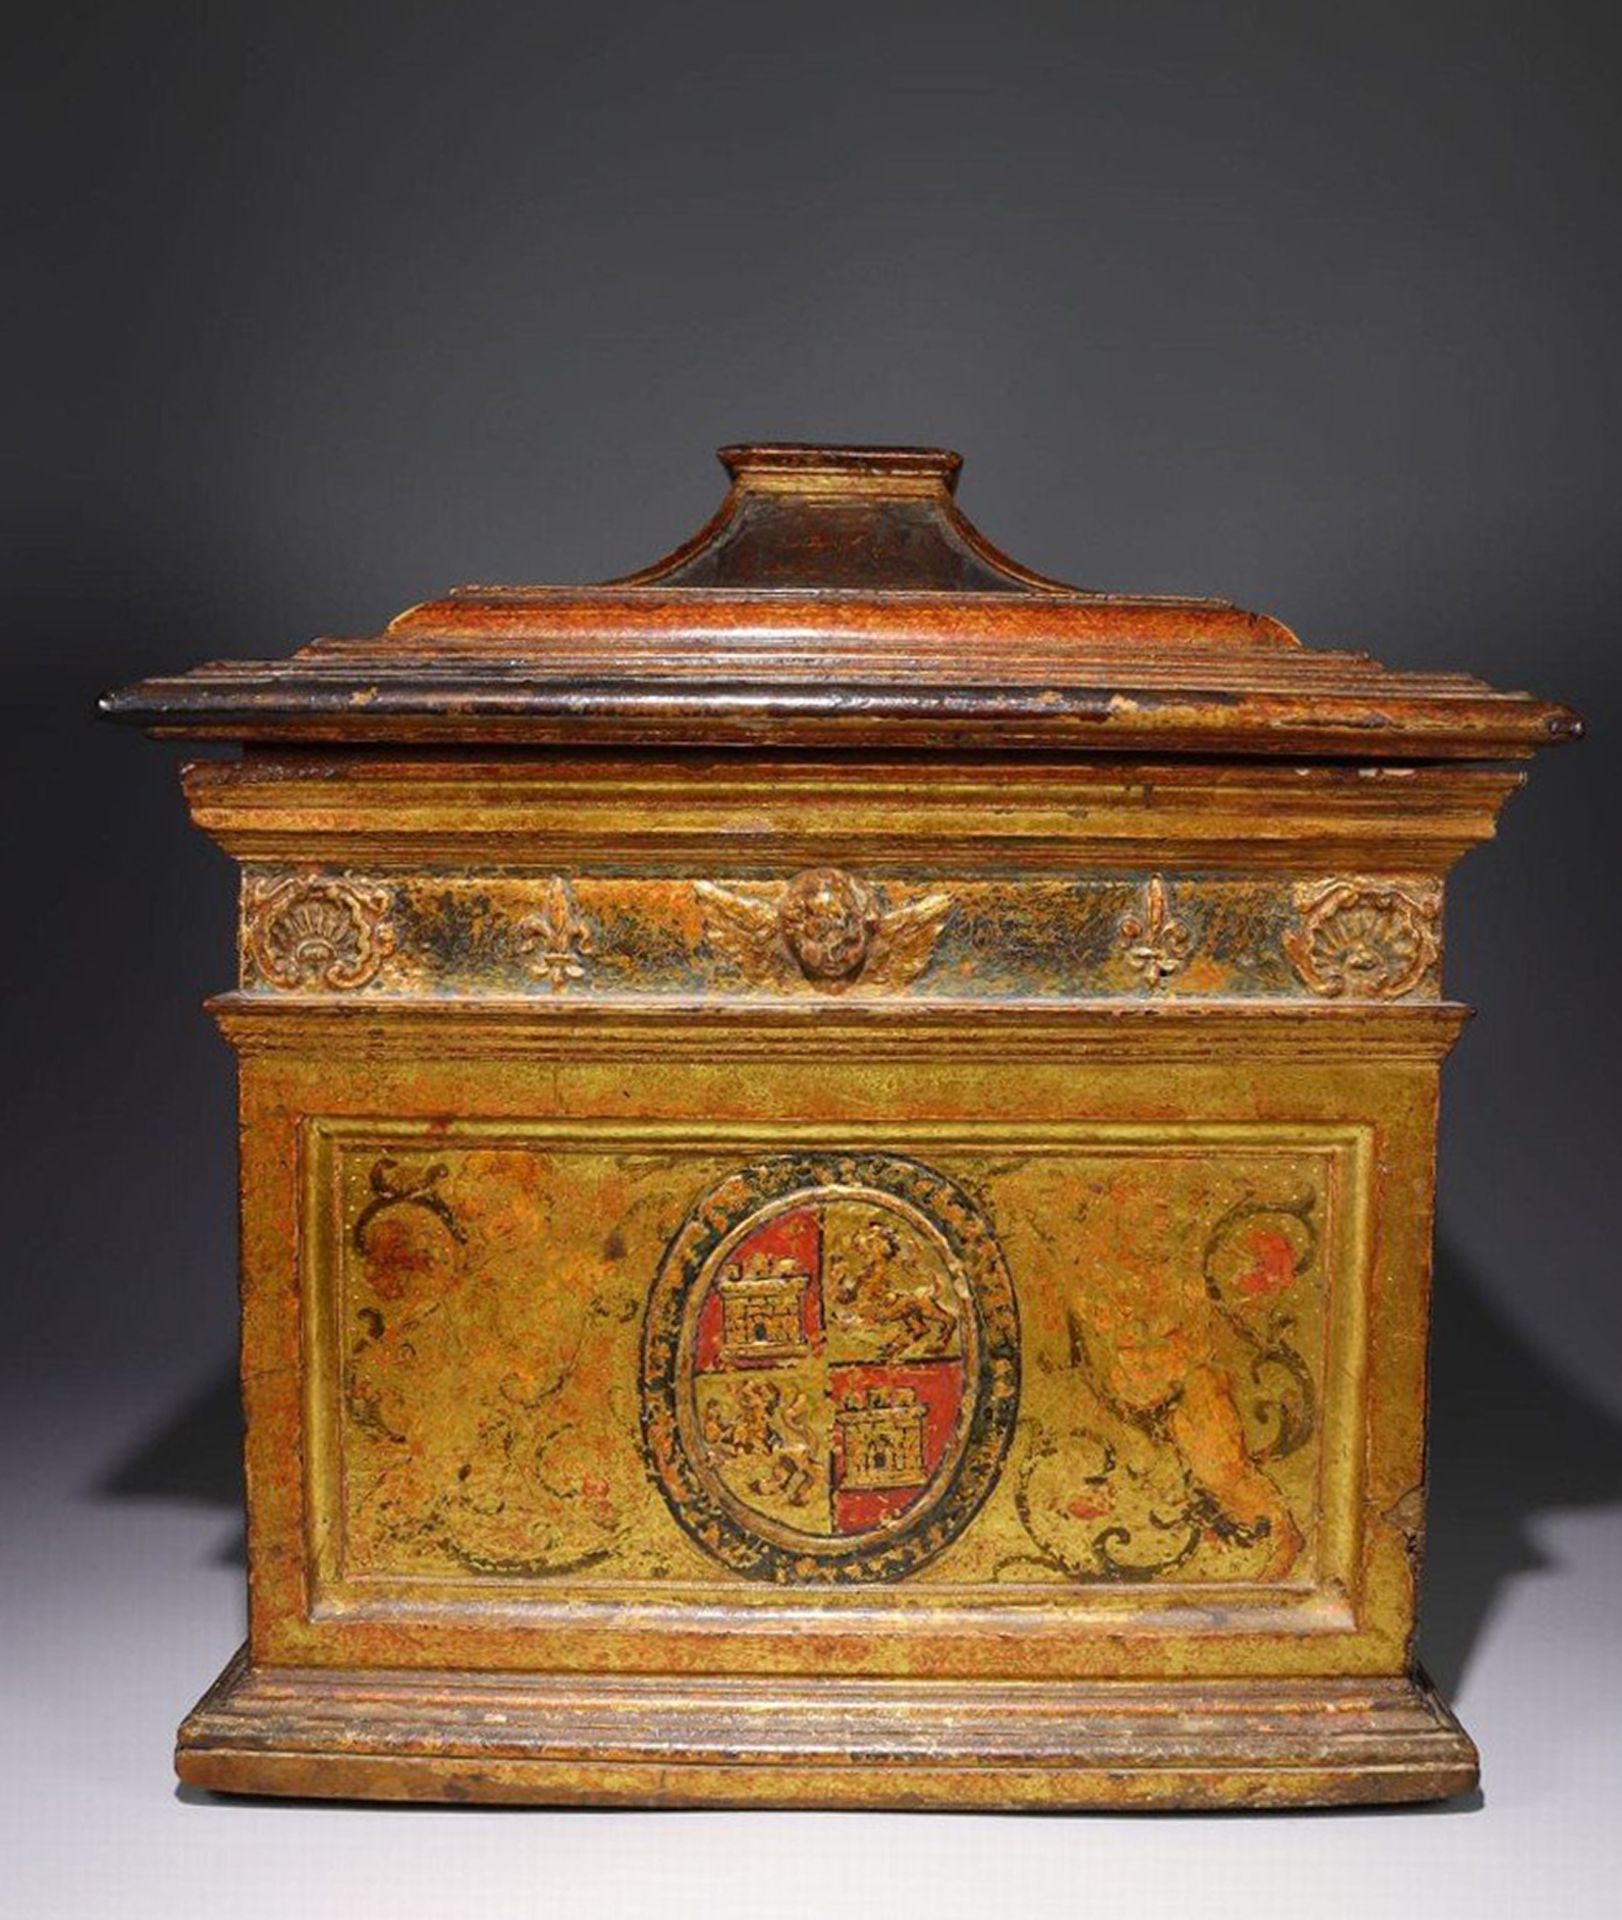 Rare Italian Medical Chest of the Renaissance, Milan or Vizcaya, made by the house of Medinaceli, he - Image 7 of 10